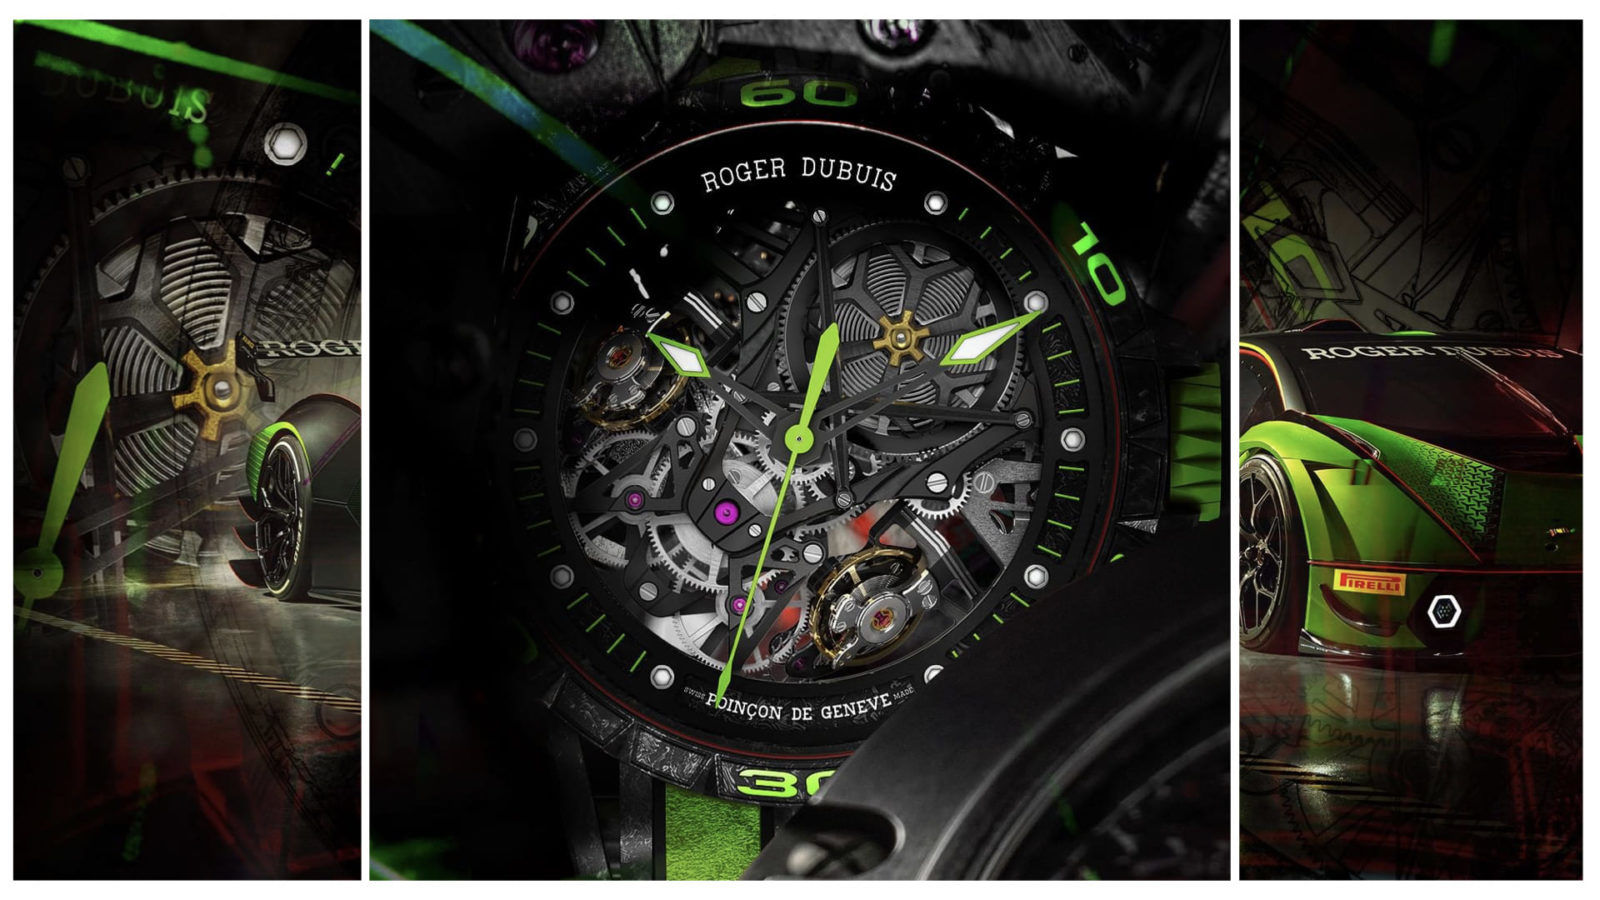 Roger Dubuis | Dare to be rare 勇創非凡